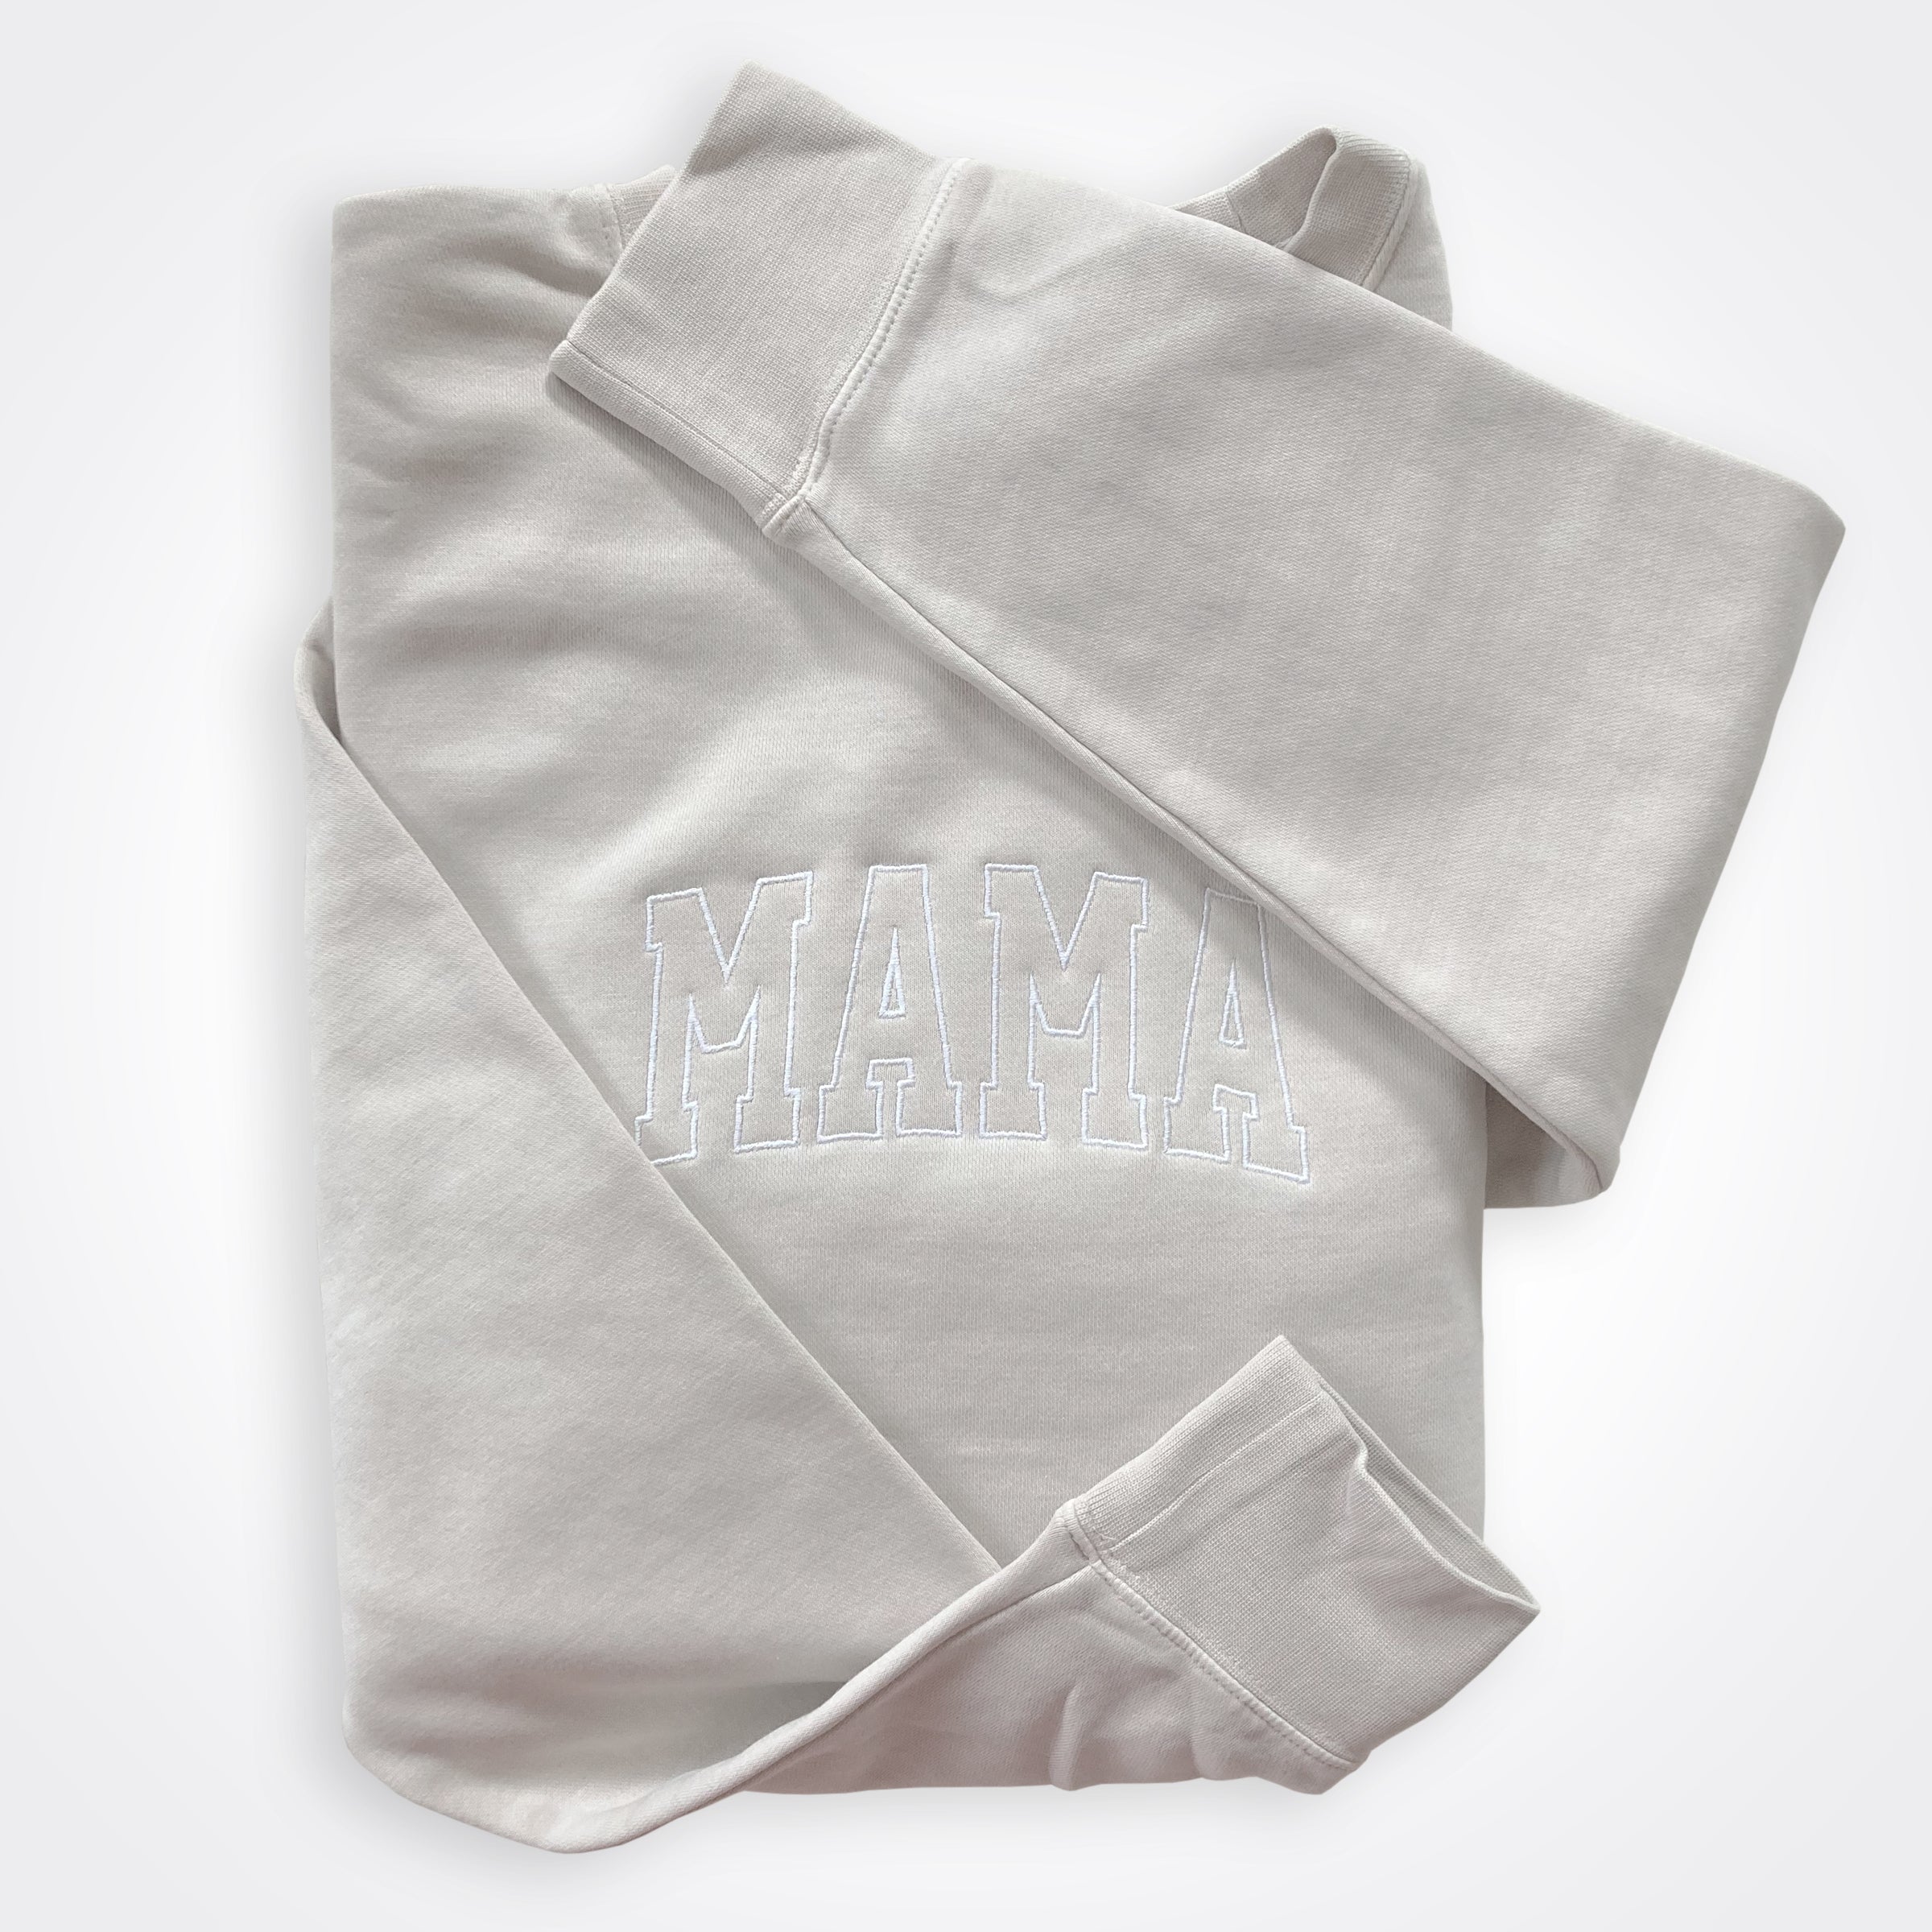 Mama Embroidered Midweight Pigment Dyed Crew Sweatshirt